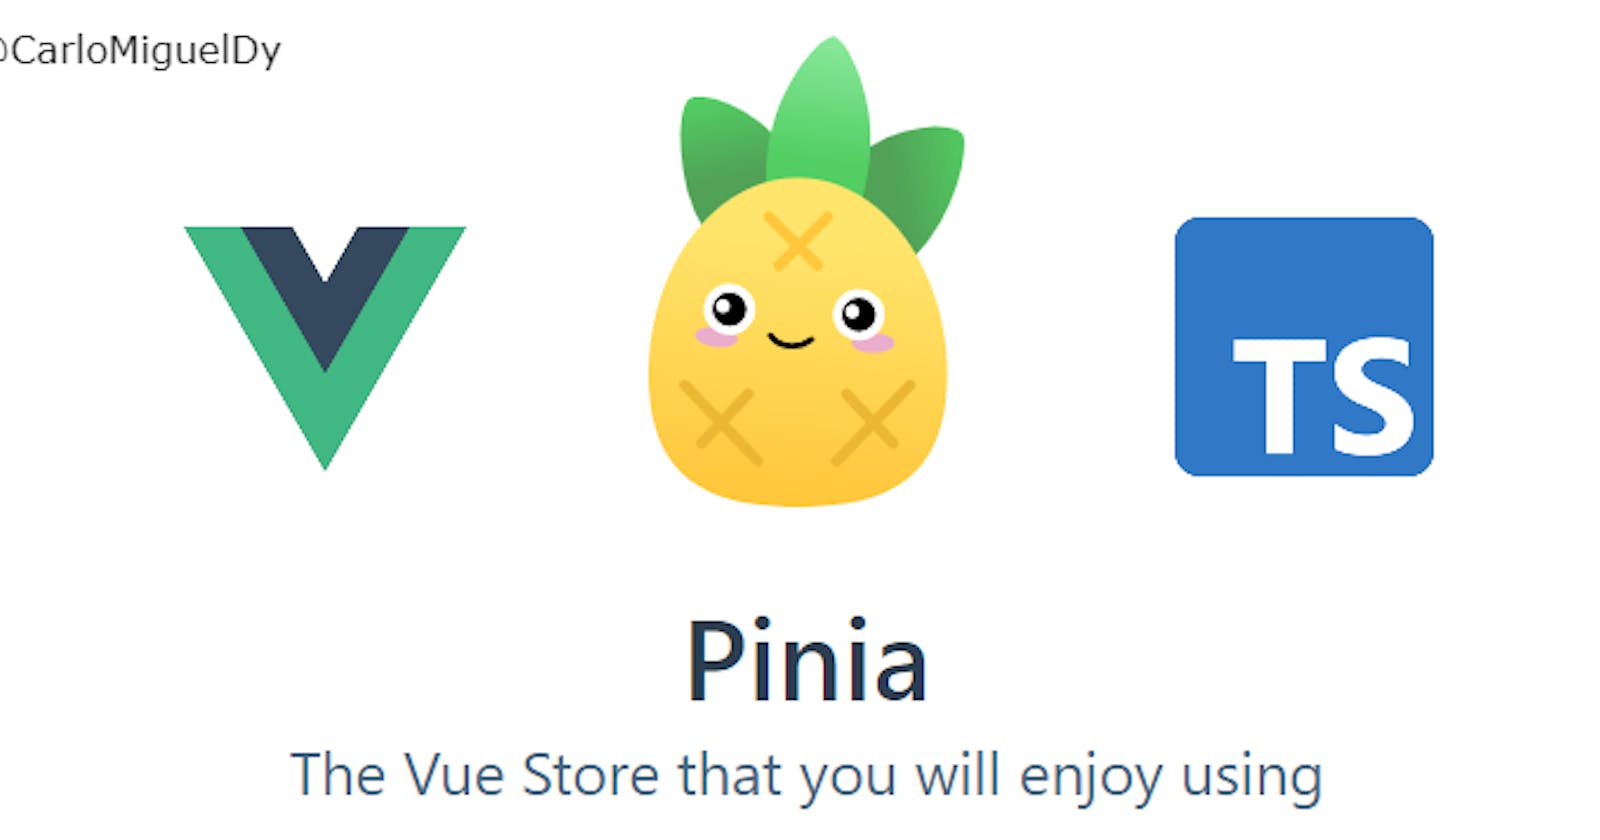 Getting started with Vue 3 + Pinia Store + TypeScript by building a Grocery List App